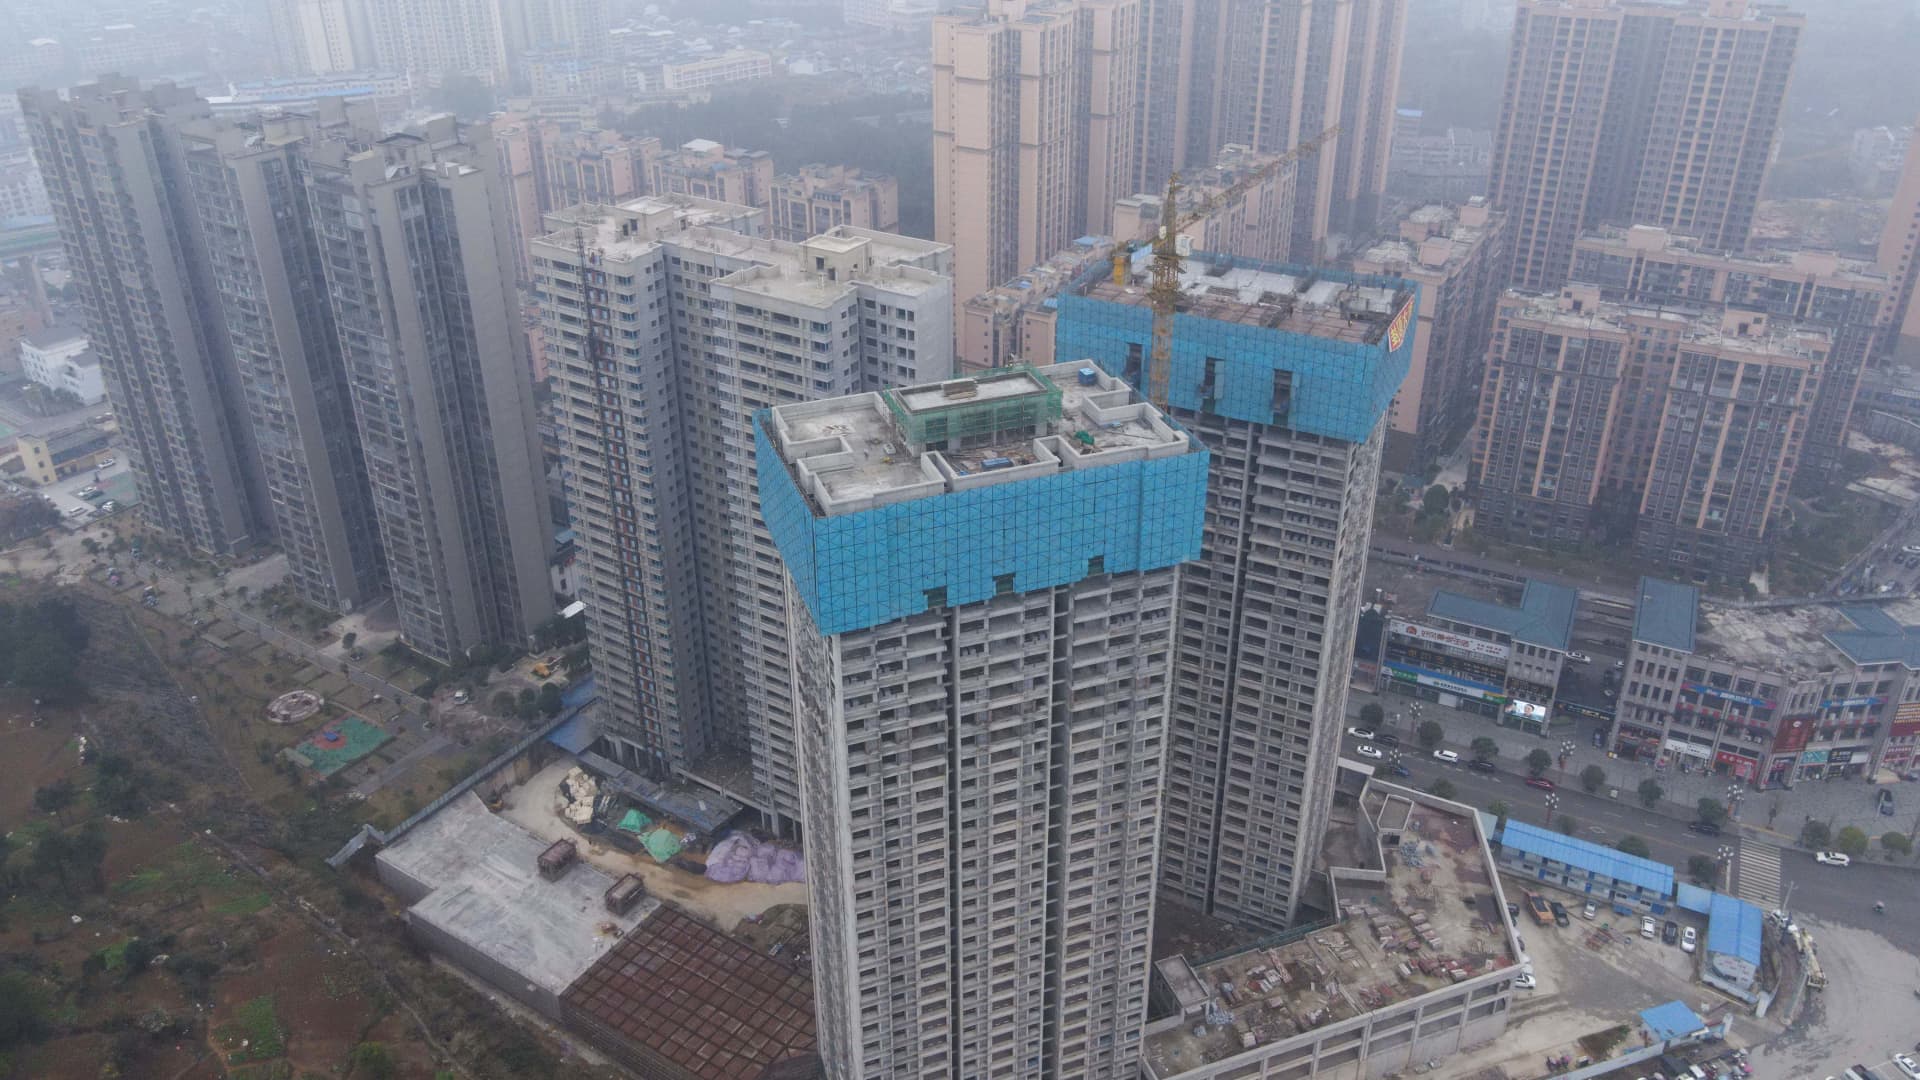 Here’s where China’s real estate troubles could spill over